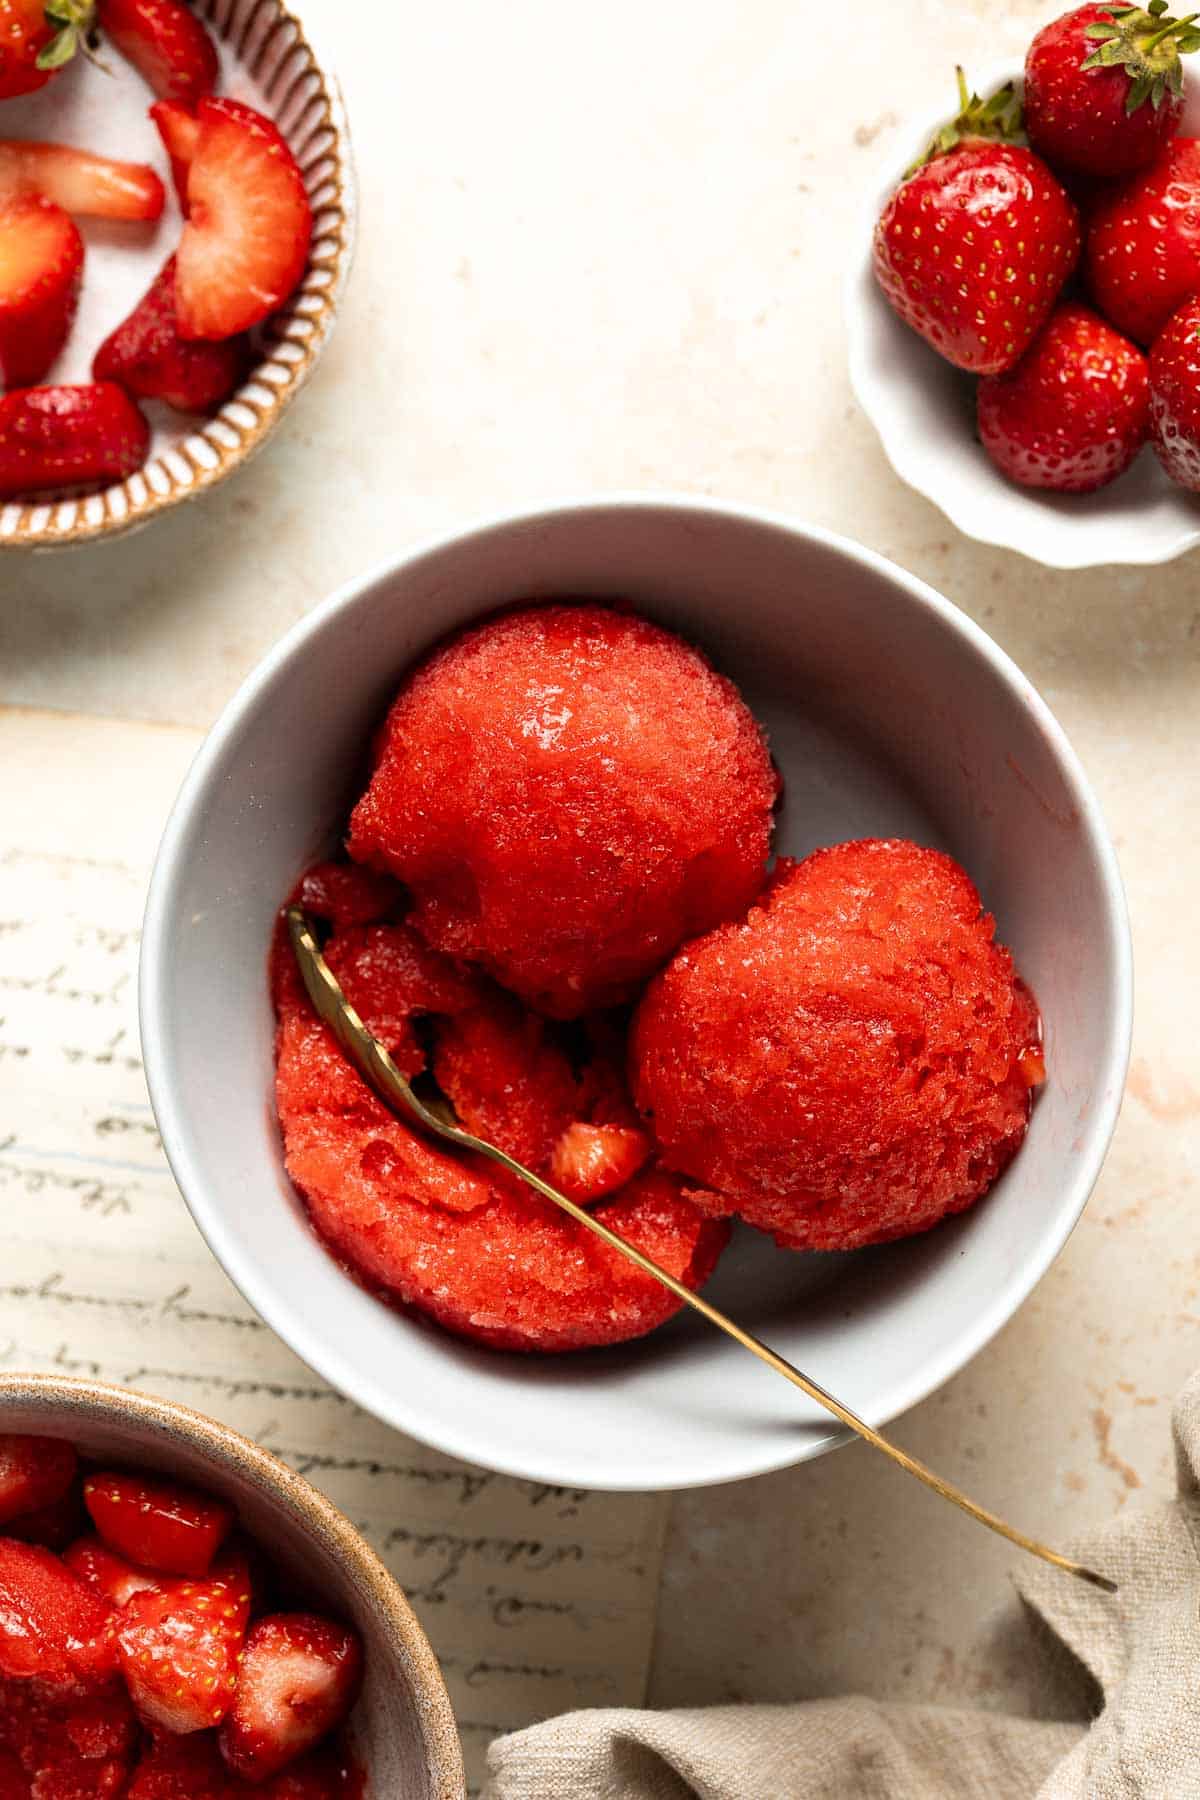 This 3-ingredient Strawberry Sorbet is a refreshing, healthy, vegan, and gluten-free frozen treat to enjoy on a hot day. Plus, no ice cream maker required! | aheadofthyme.com